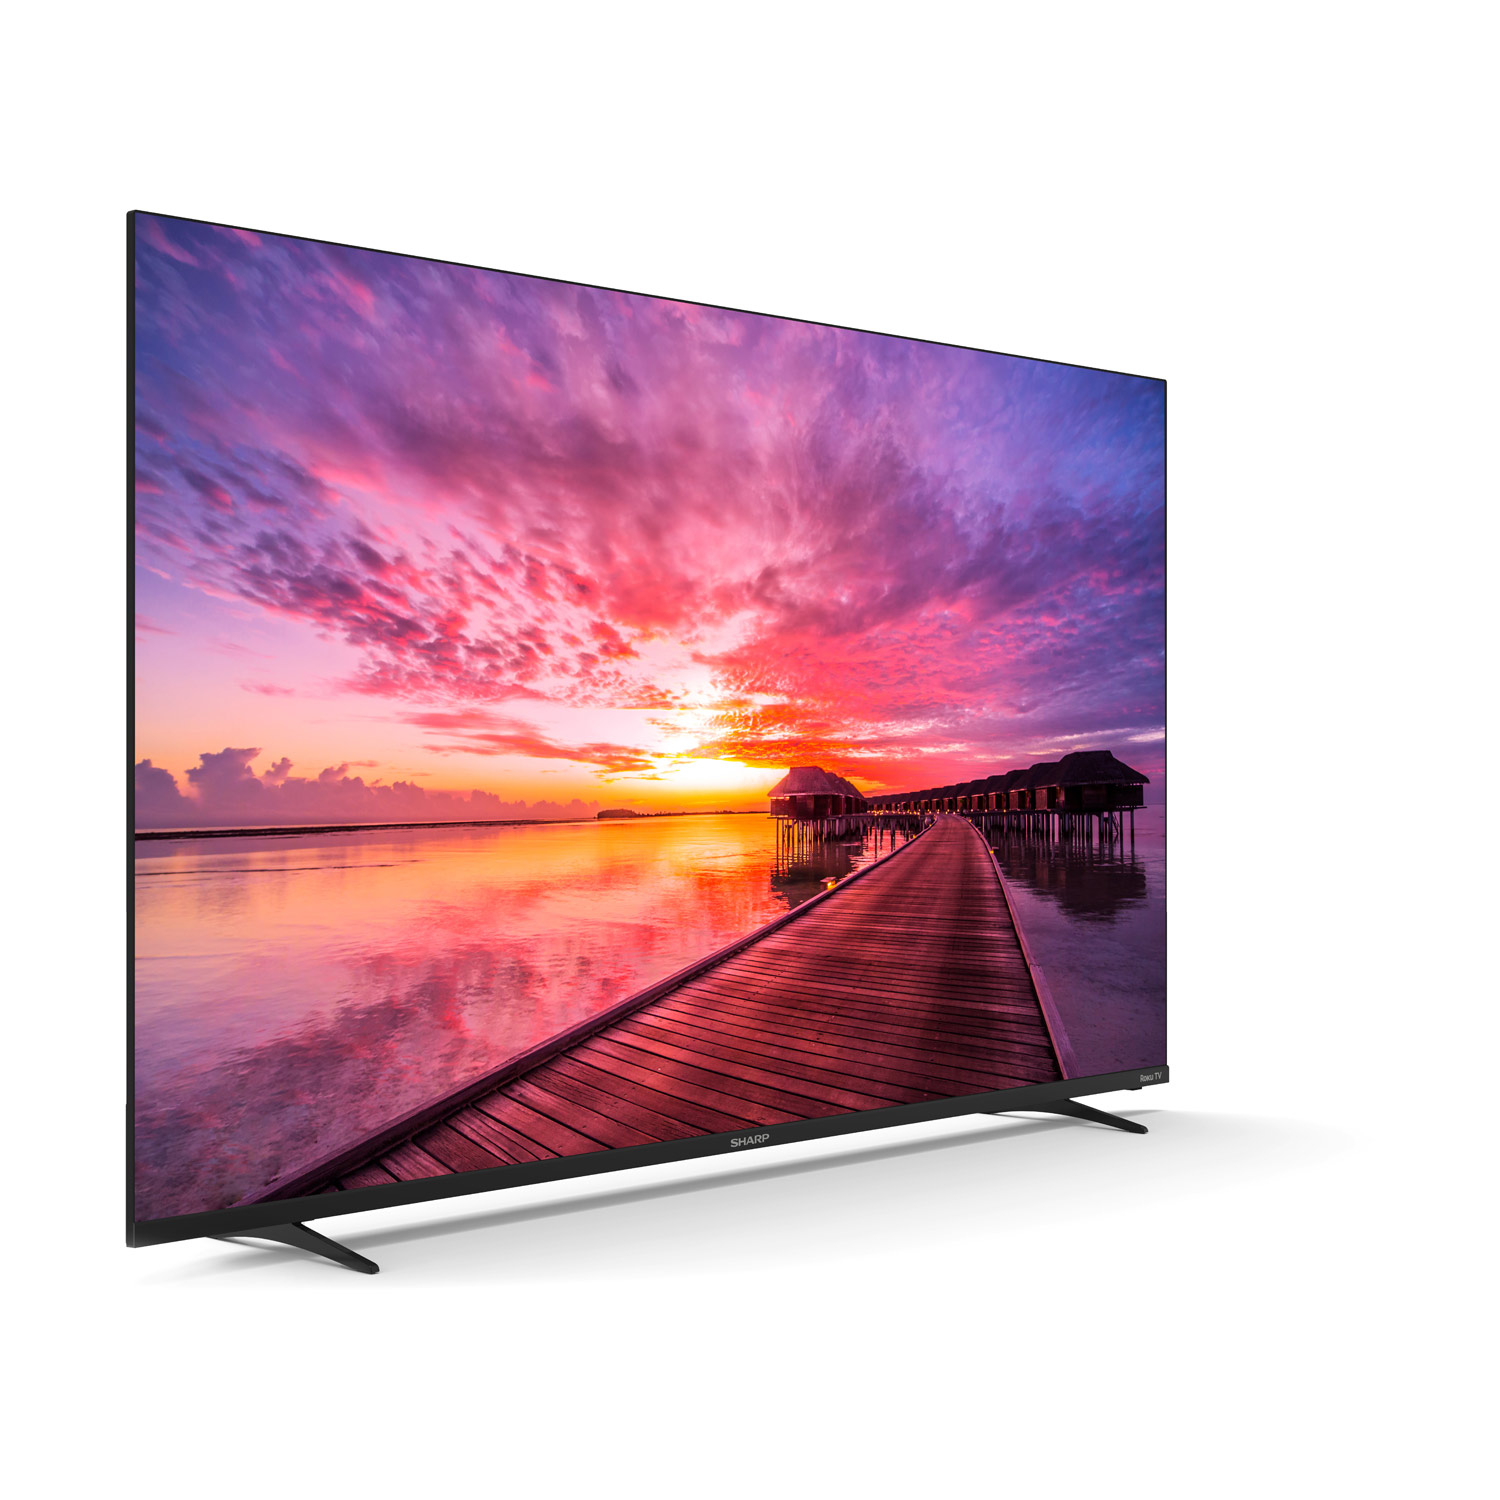 Back View of the SHARP® AQUOS 65" Class (64.5" diag.) LED 4K Smart Roku TV with HDR10 (4T-C65DL7UR)